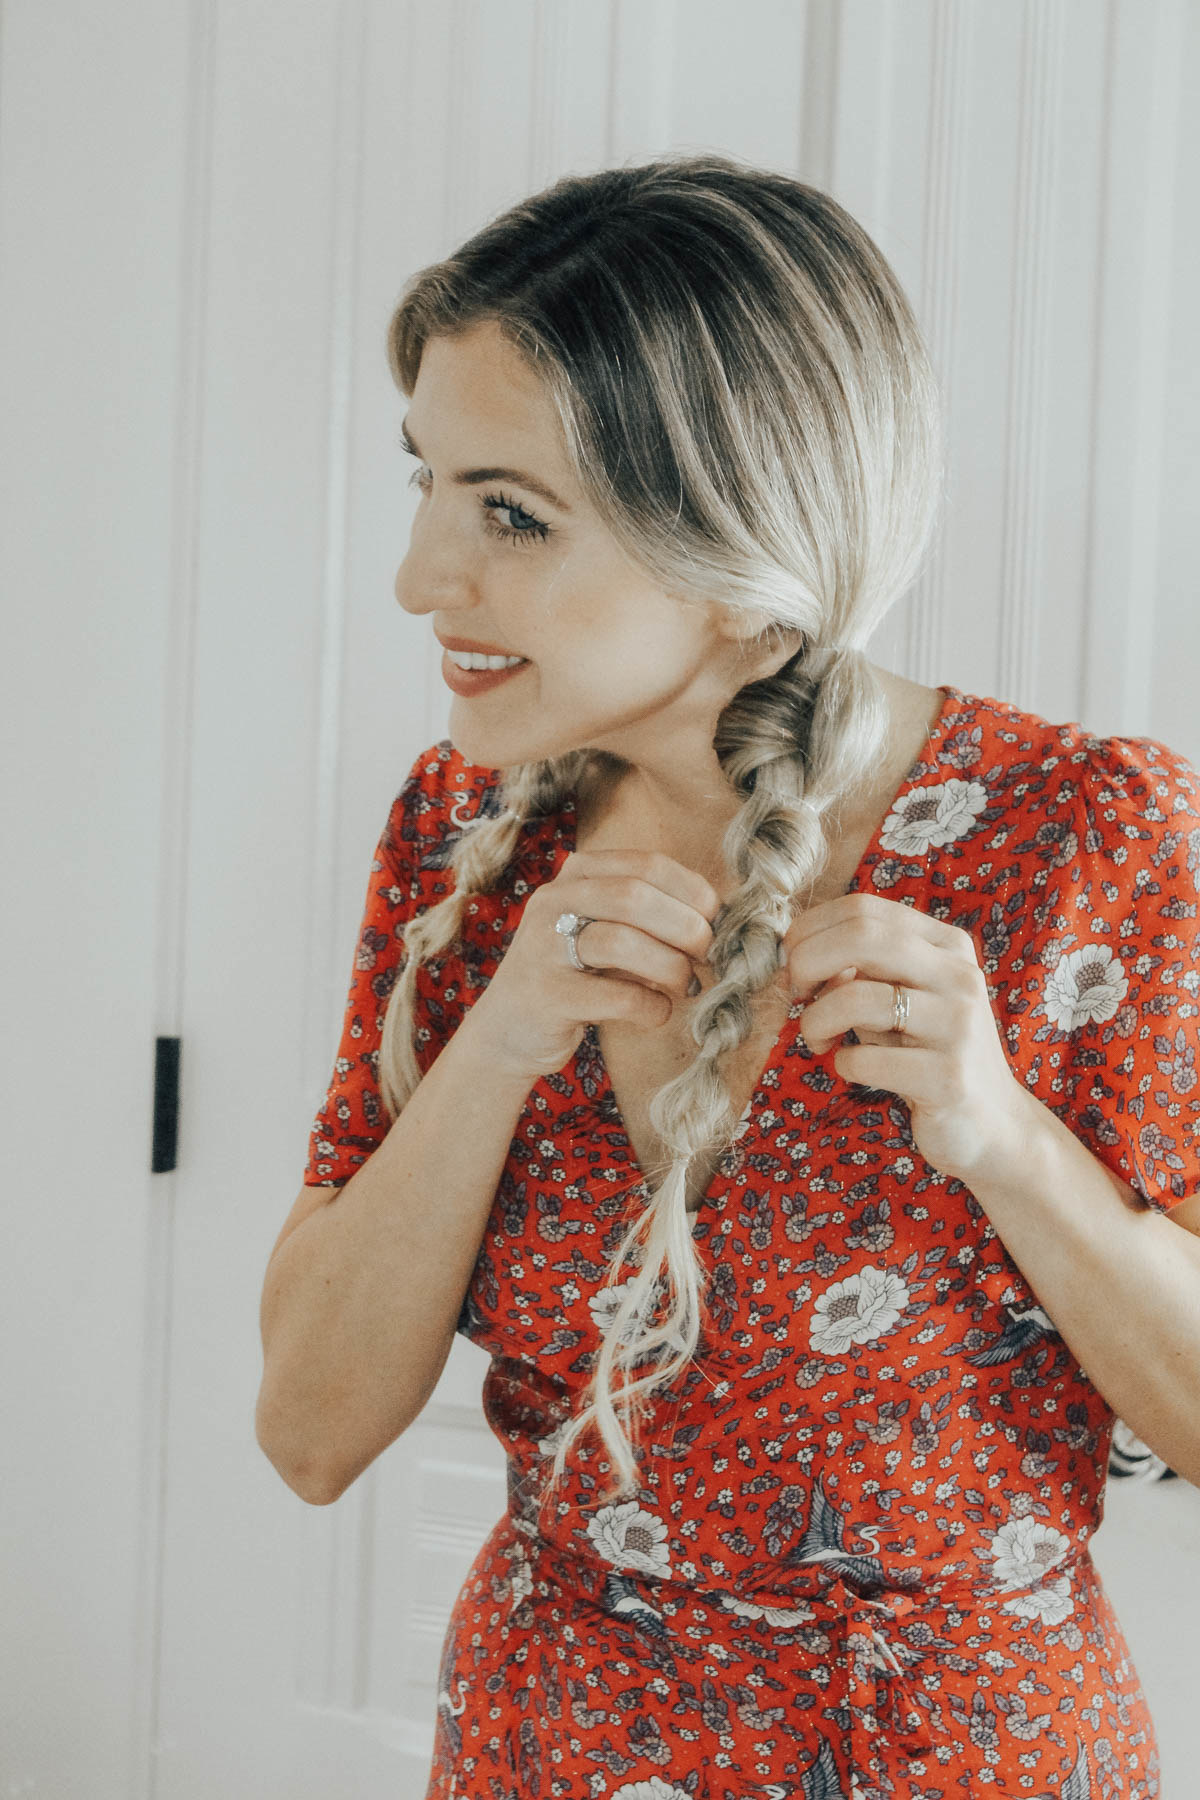 knotted pigtail braids